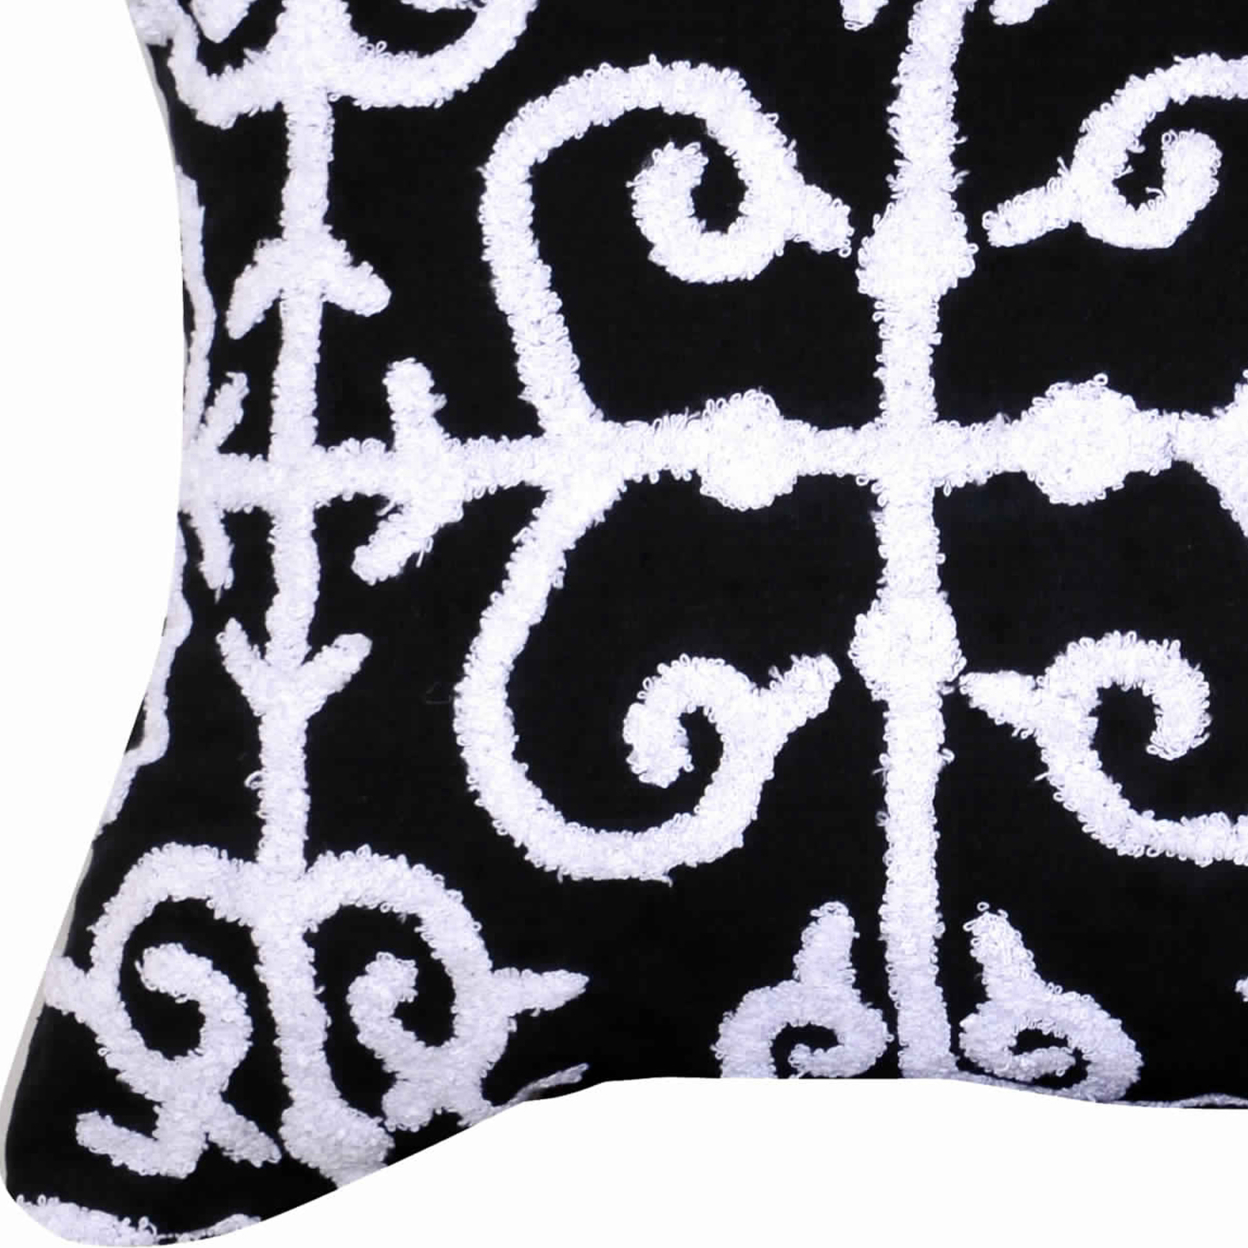 20 X 16 Inch Cotton Pillow With Vermicular Pattern, Set Of 2, Black And White- Saltoro Sherpi